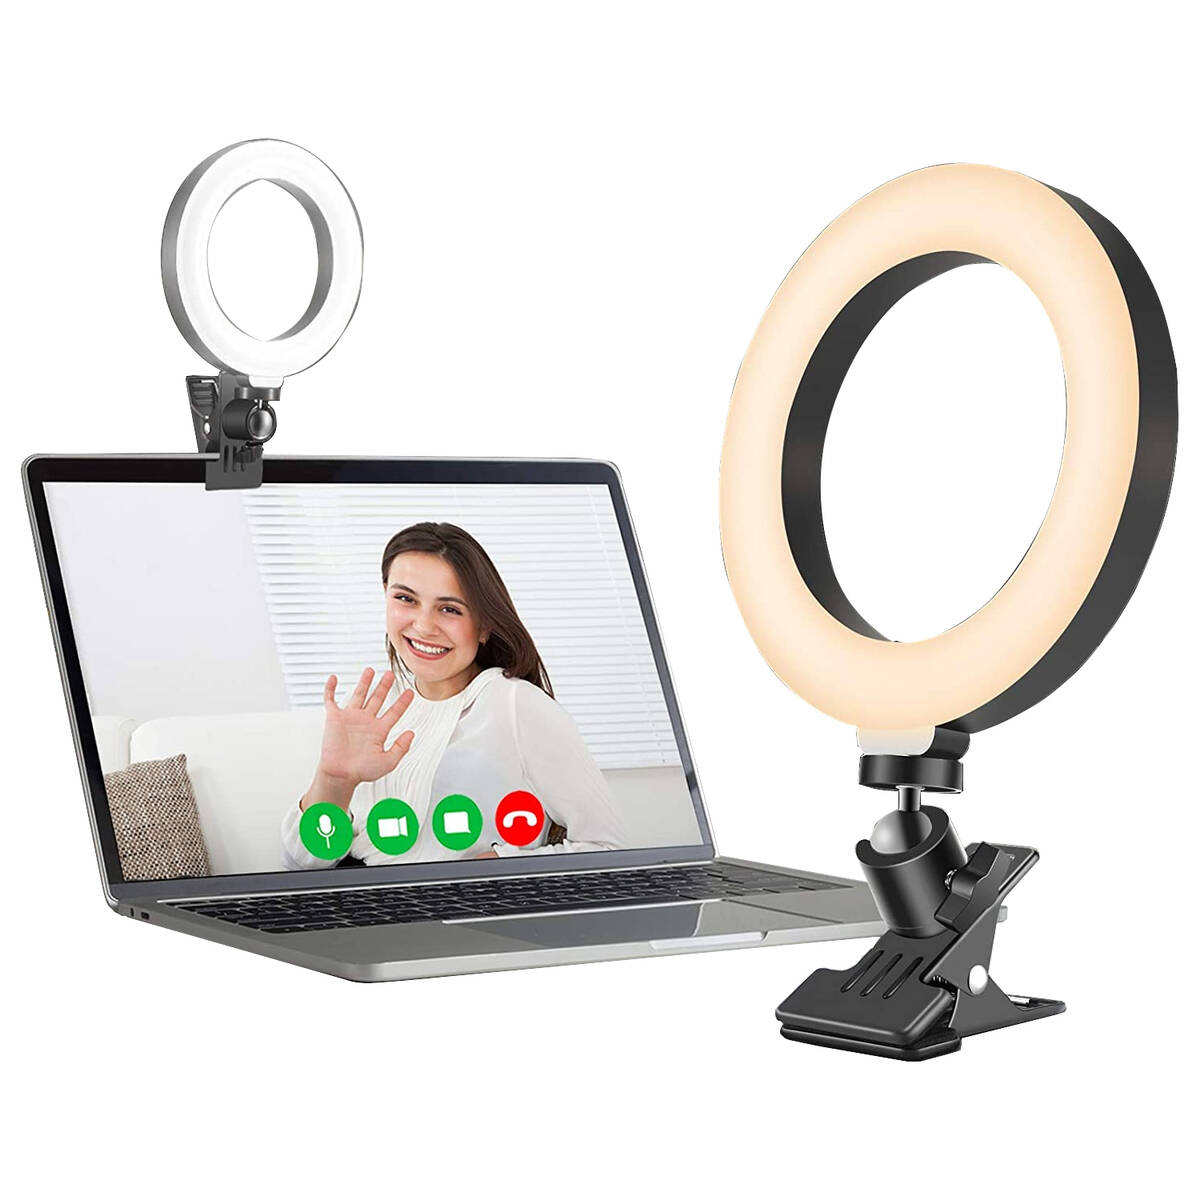 1. Ring Light for Laptop Computer Online conferencing is part of our lives now. Help the busine ...